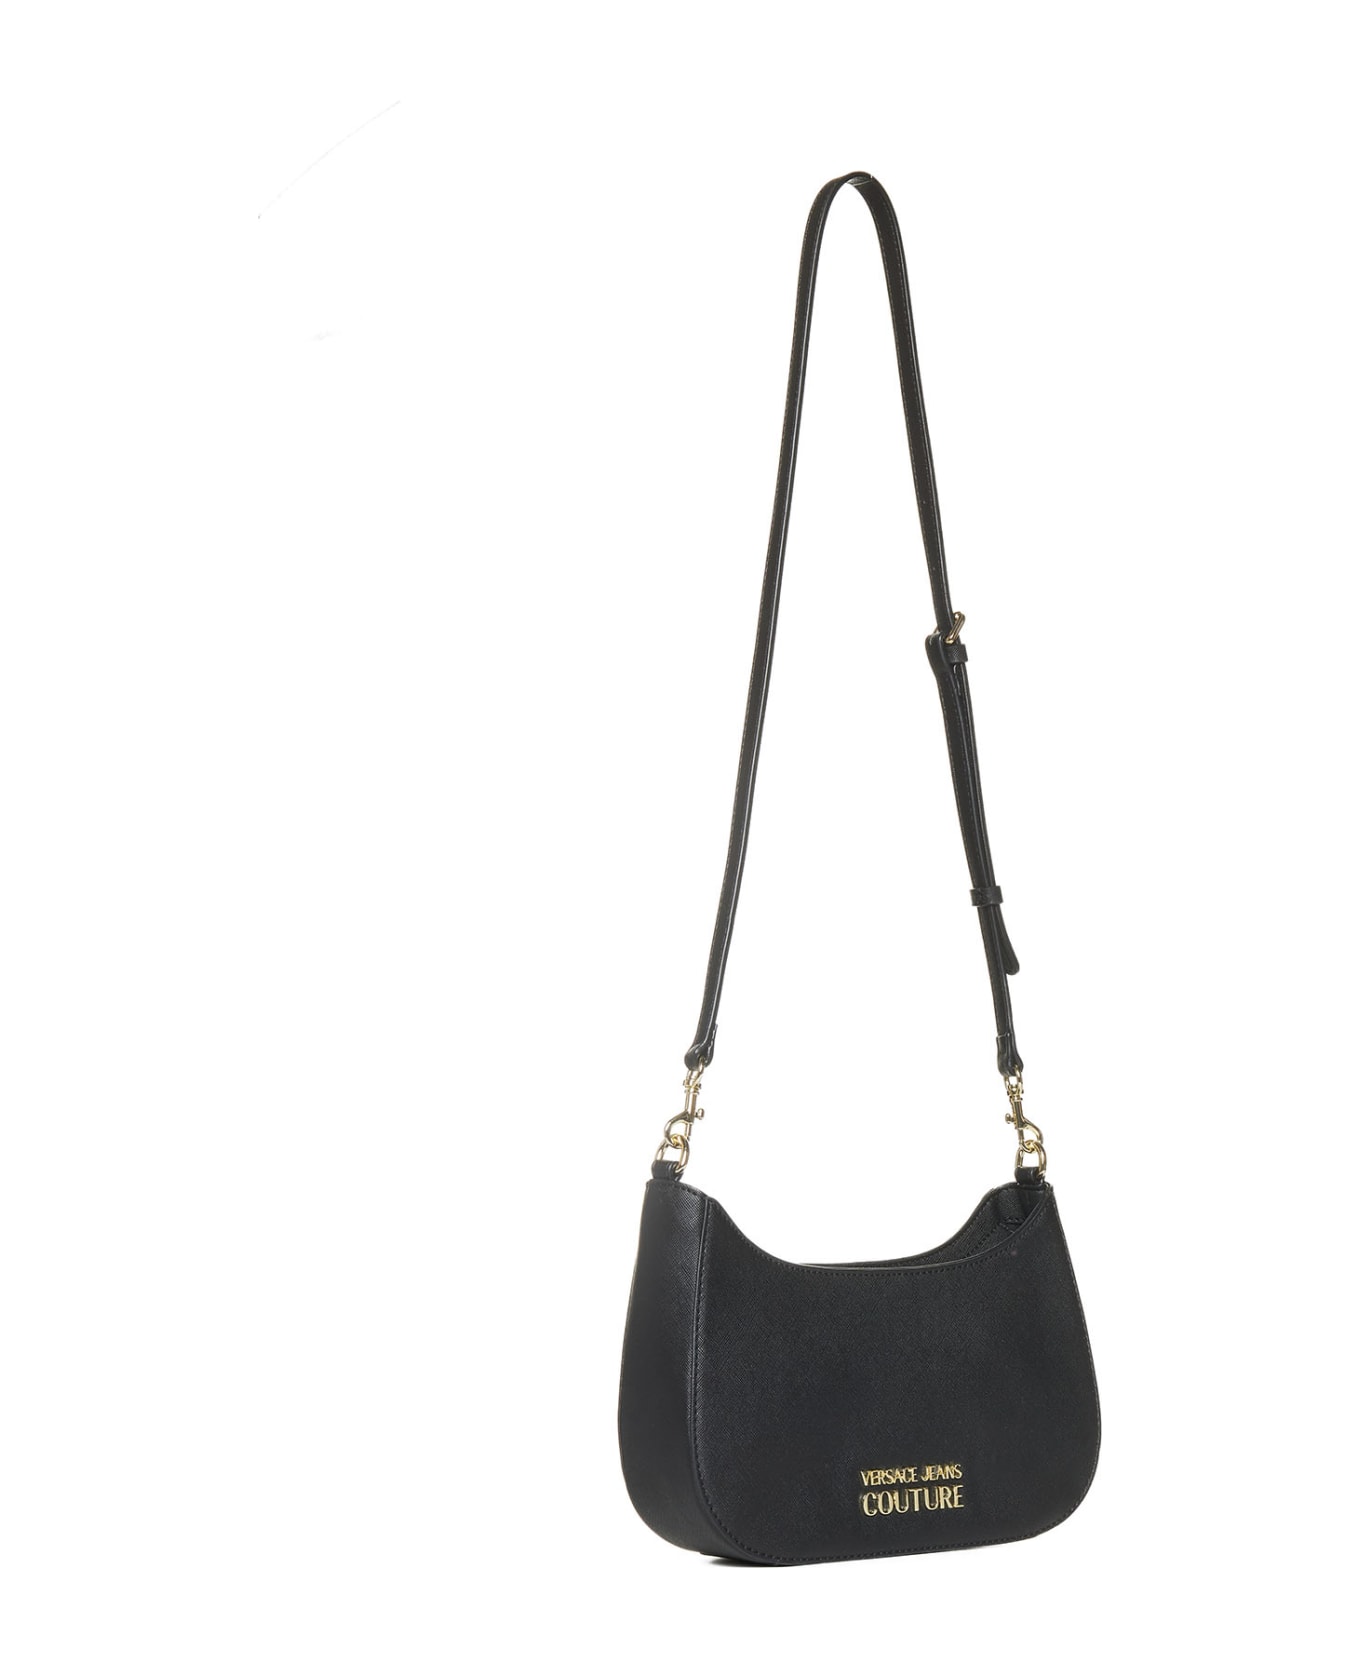 Versace Jeans Couture Thelma Classic Bag - Black